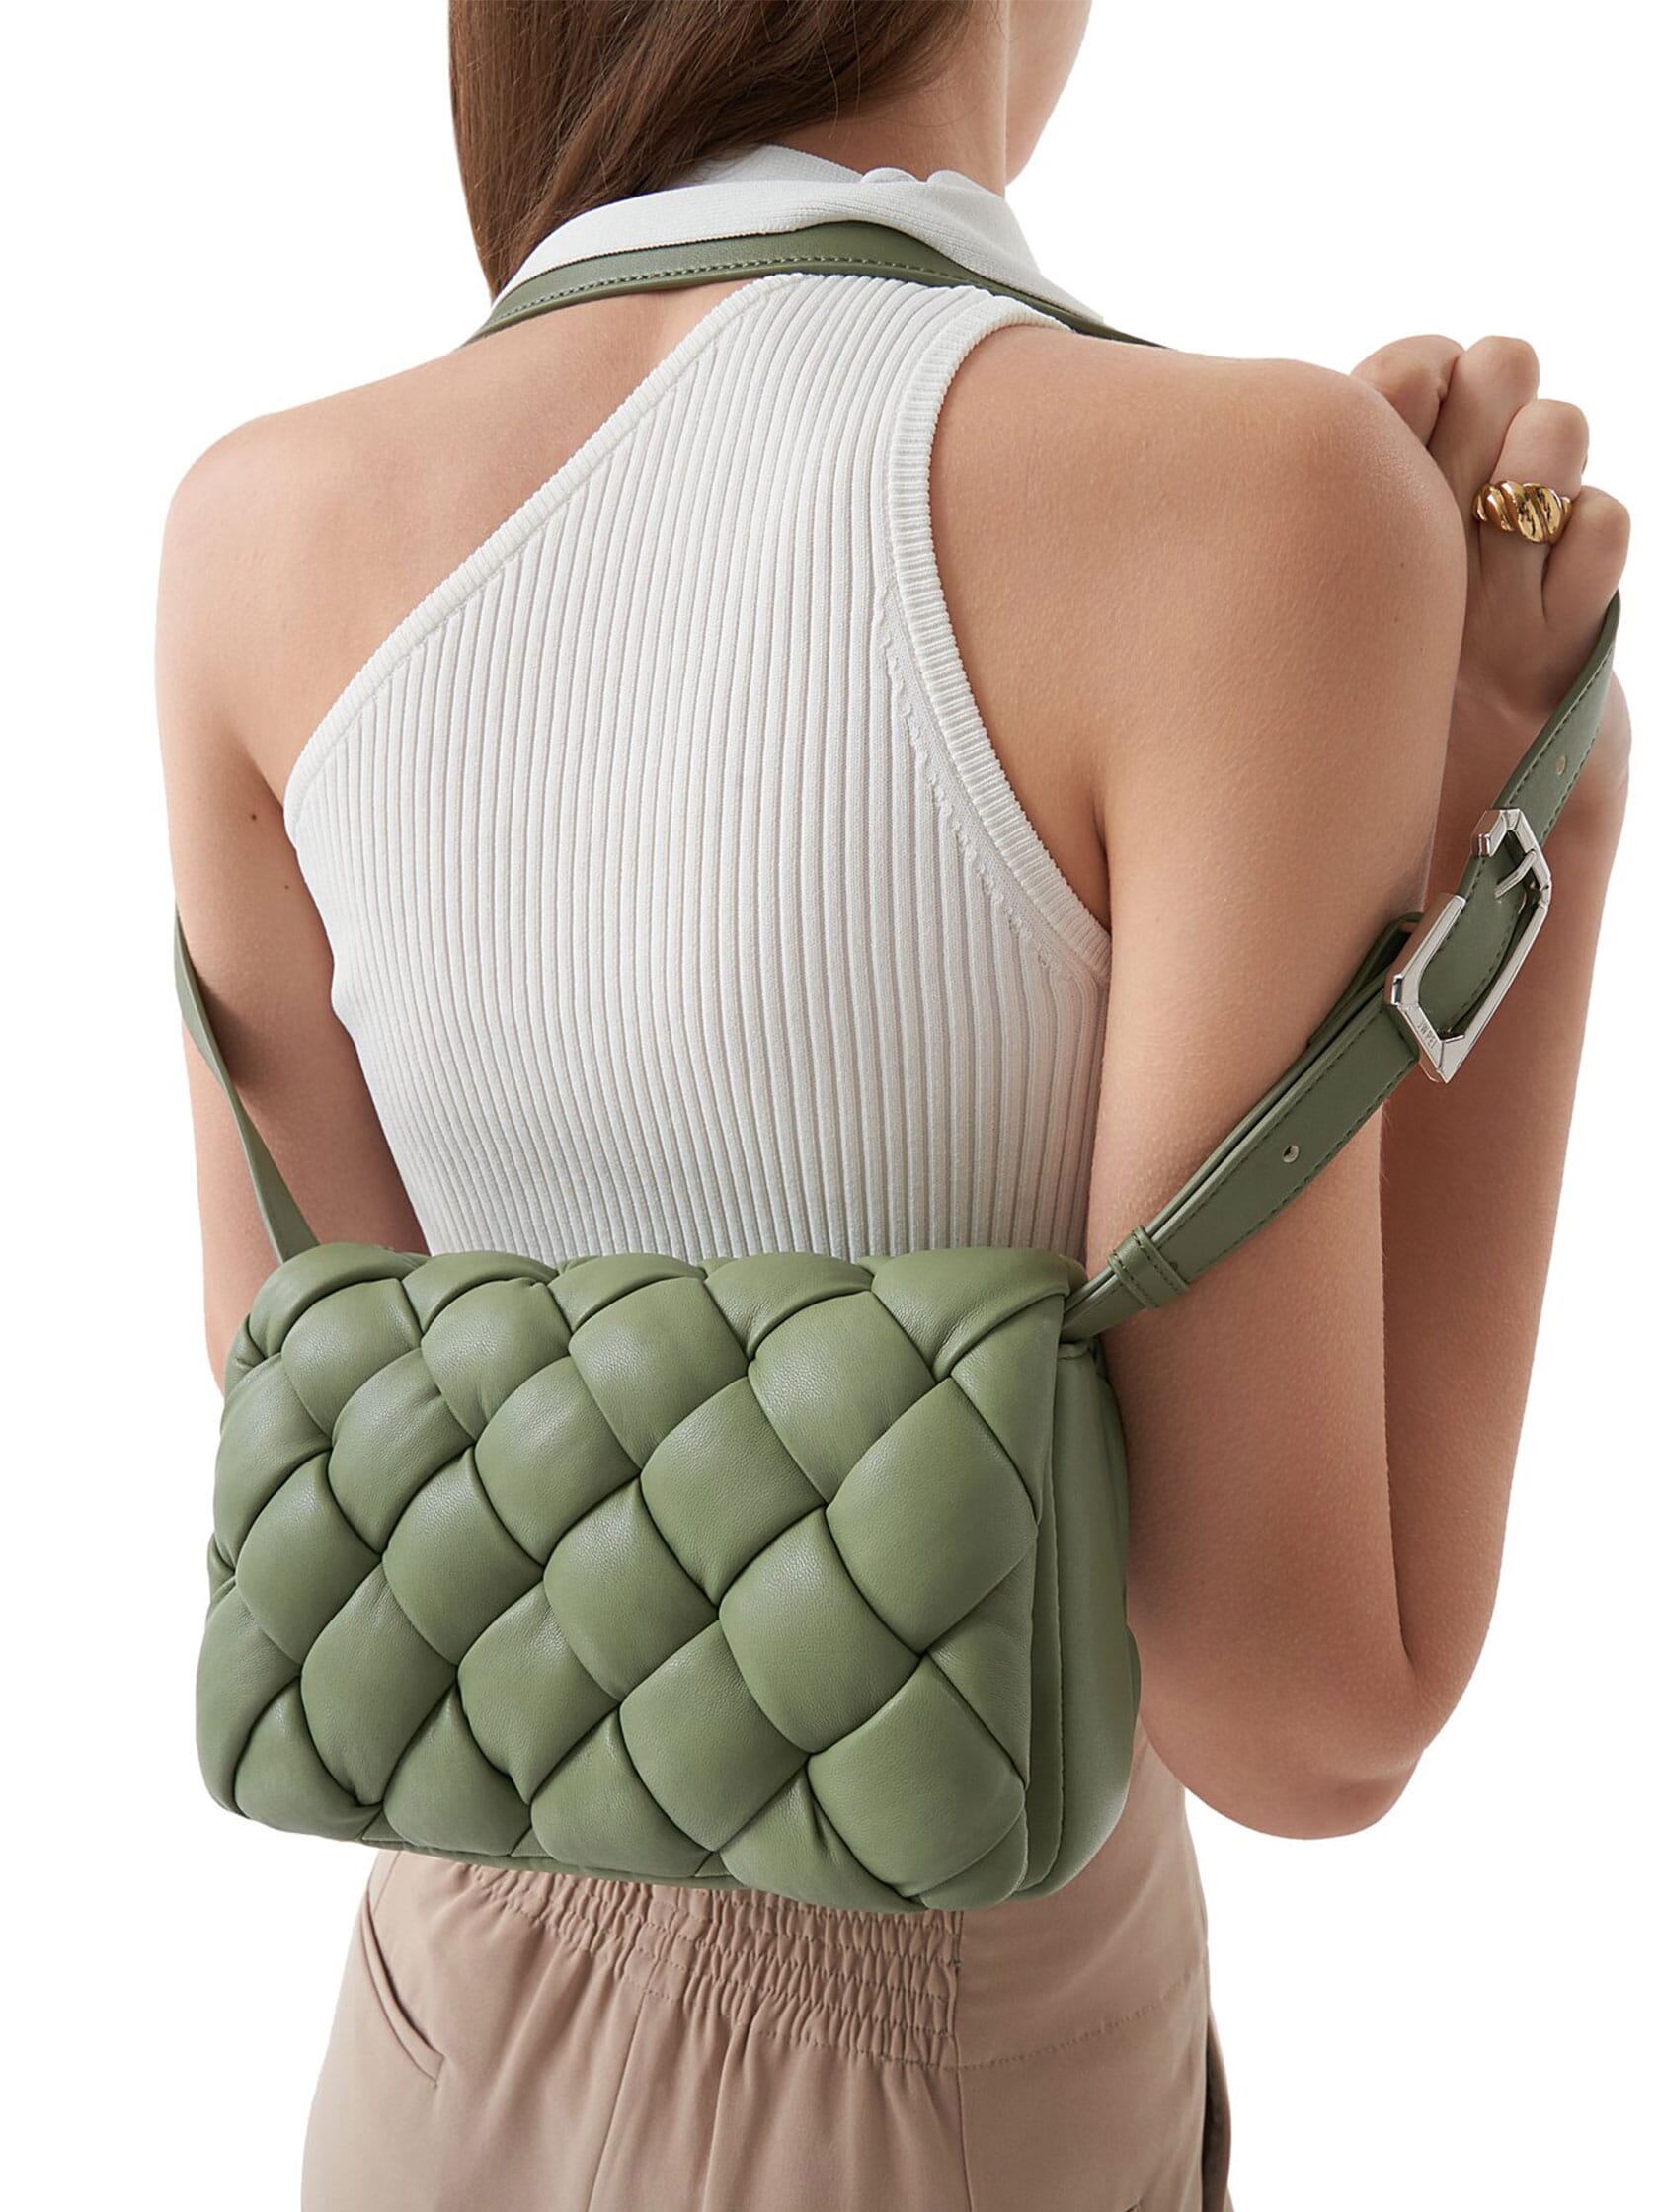 Buy the JW PEI Maze Quilted Crossbody Sage Green